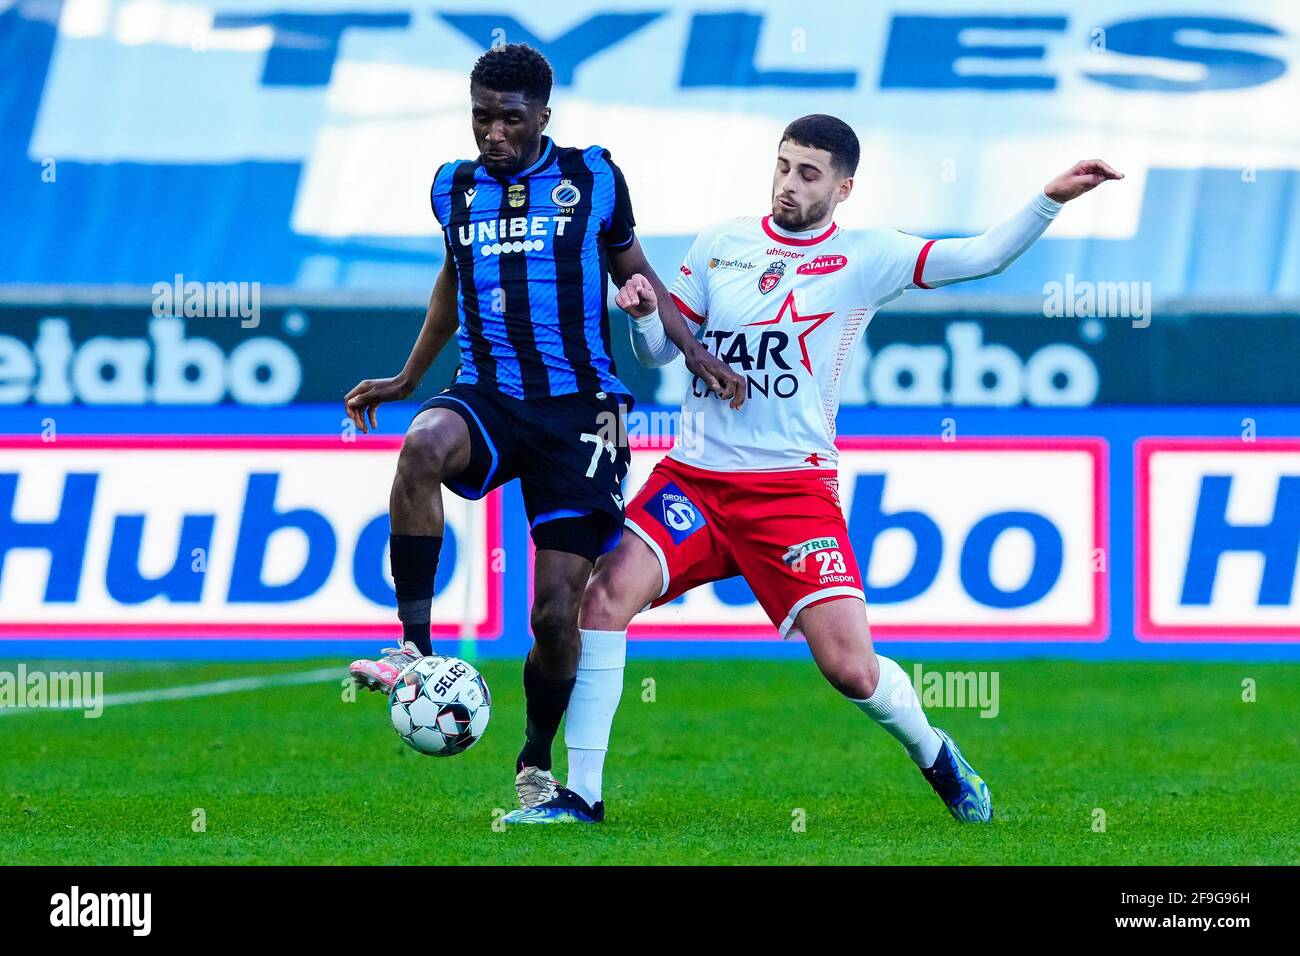 BRUGES, BELGIUM - APRIL 18: Clinton Mata of Club Brugge, Bruno Xadas of Excelsior Mouscron during the Pro League match between Club Brugge and Excelsi Stock Photo